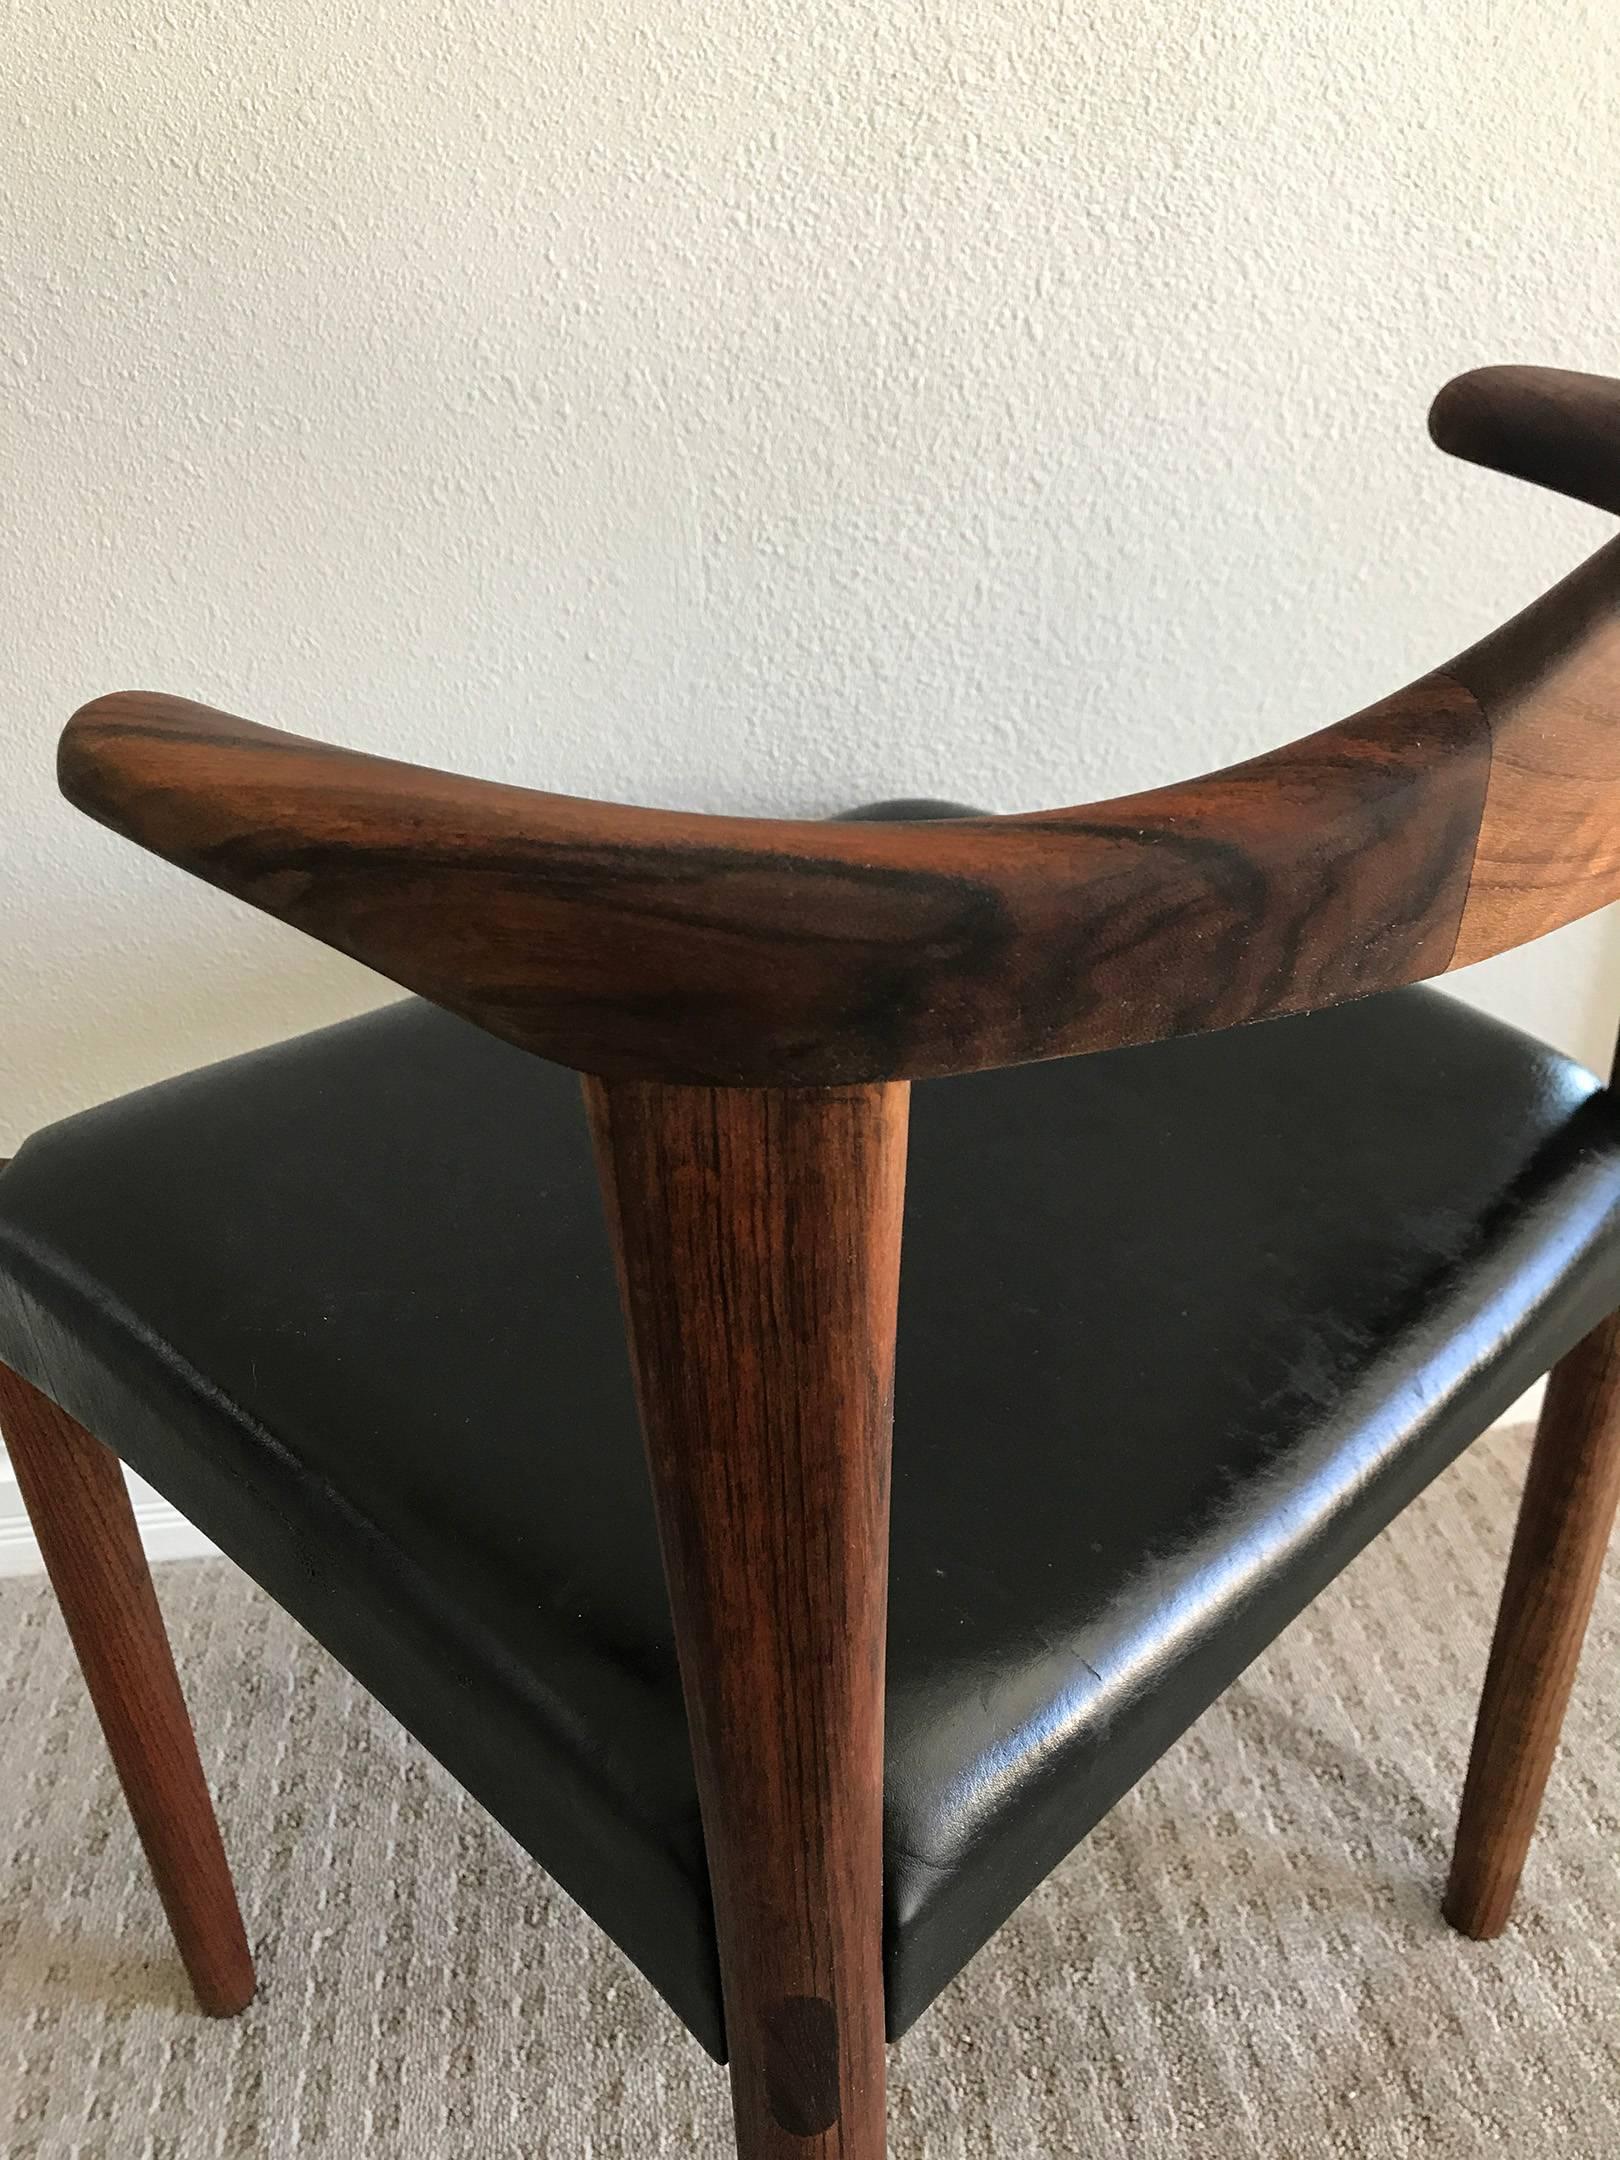 An exquisite, sculpted rosewood bull horn chair by Harry Ostergaard for Randers Mobelfabrik. 

A design similar to that of Hans Wegner's bull horn chair; this hand-sculpted chair is composed of solid rosewood and has incredible detailed rosewood